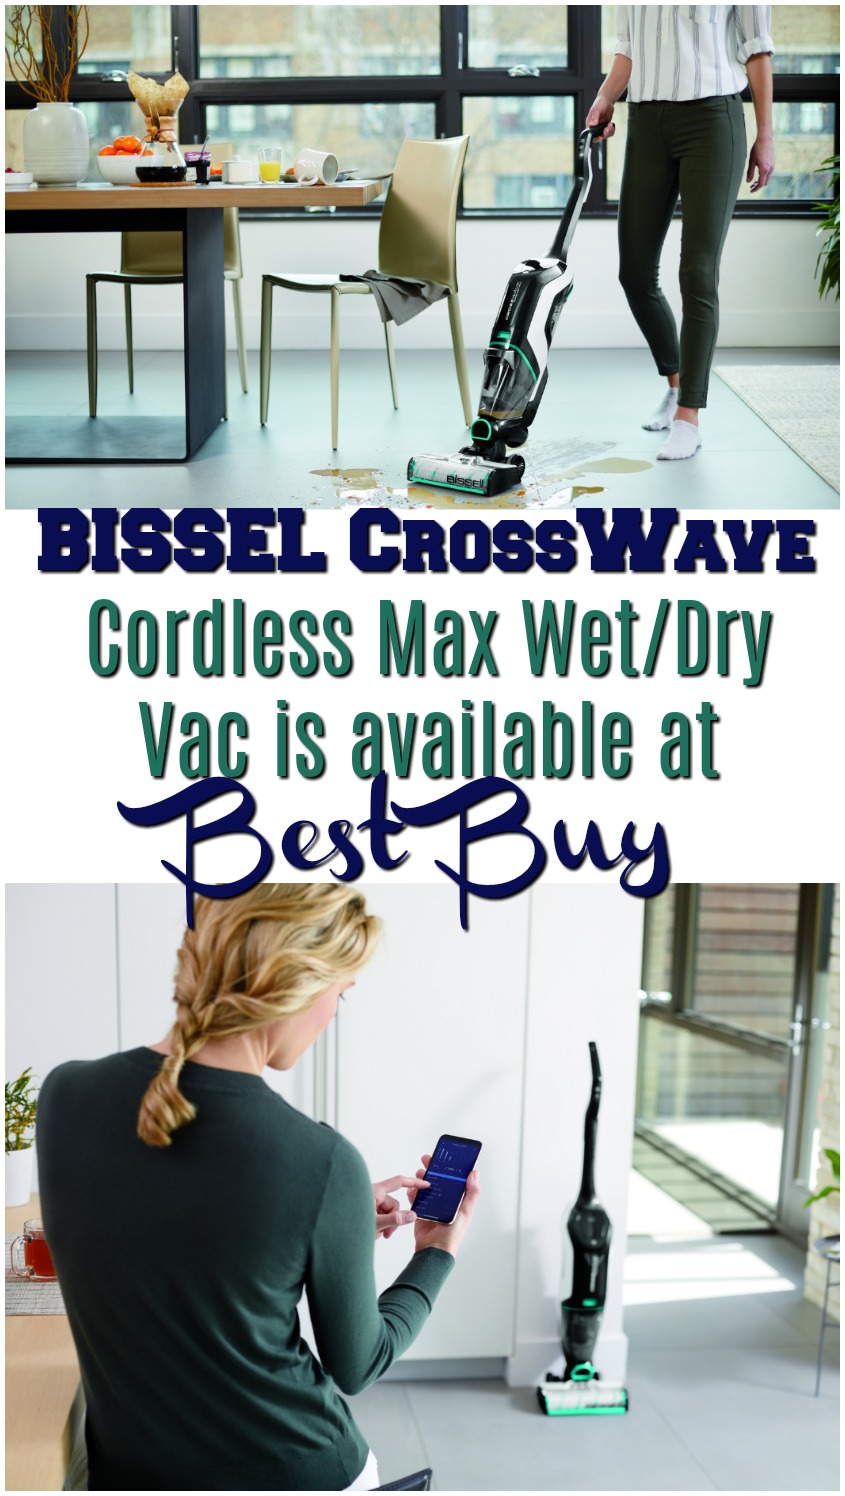 Get the BISSEL CrossWave Cordless Max Wet/dry Vacuum at #BestBuy #BuyBISSELLSavePets #ad #pets